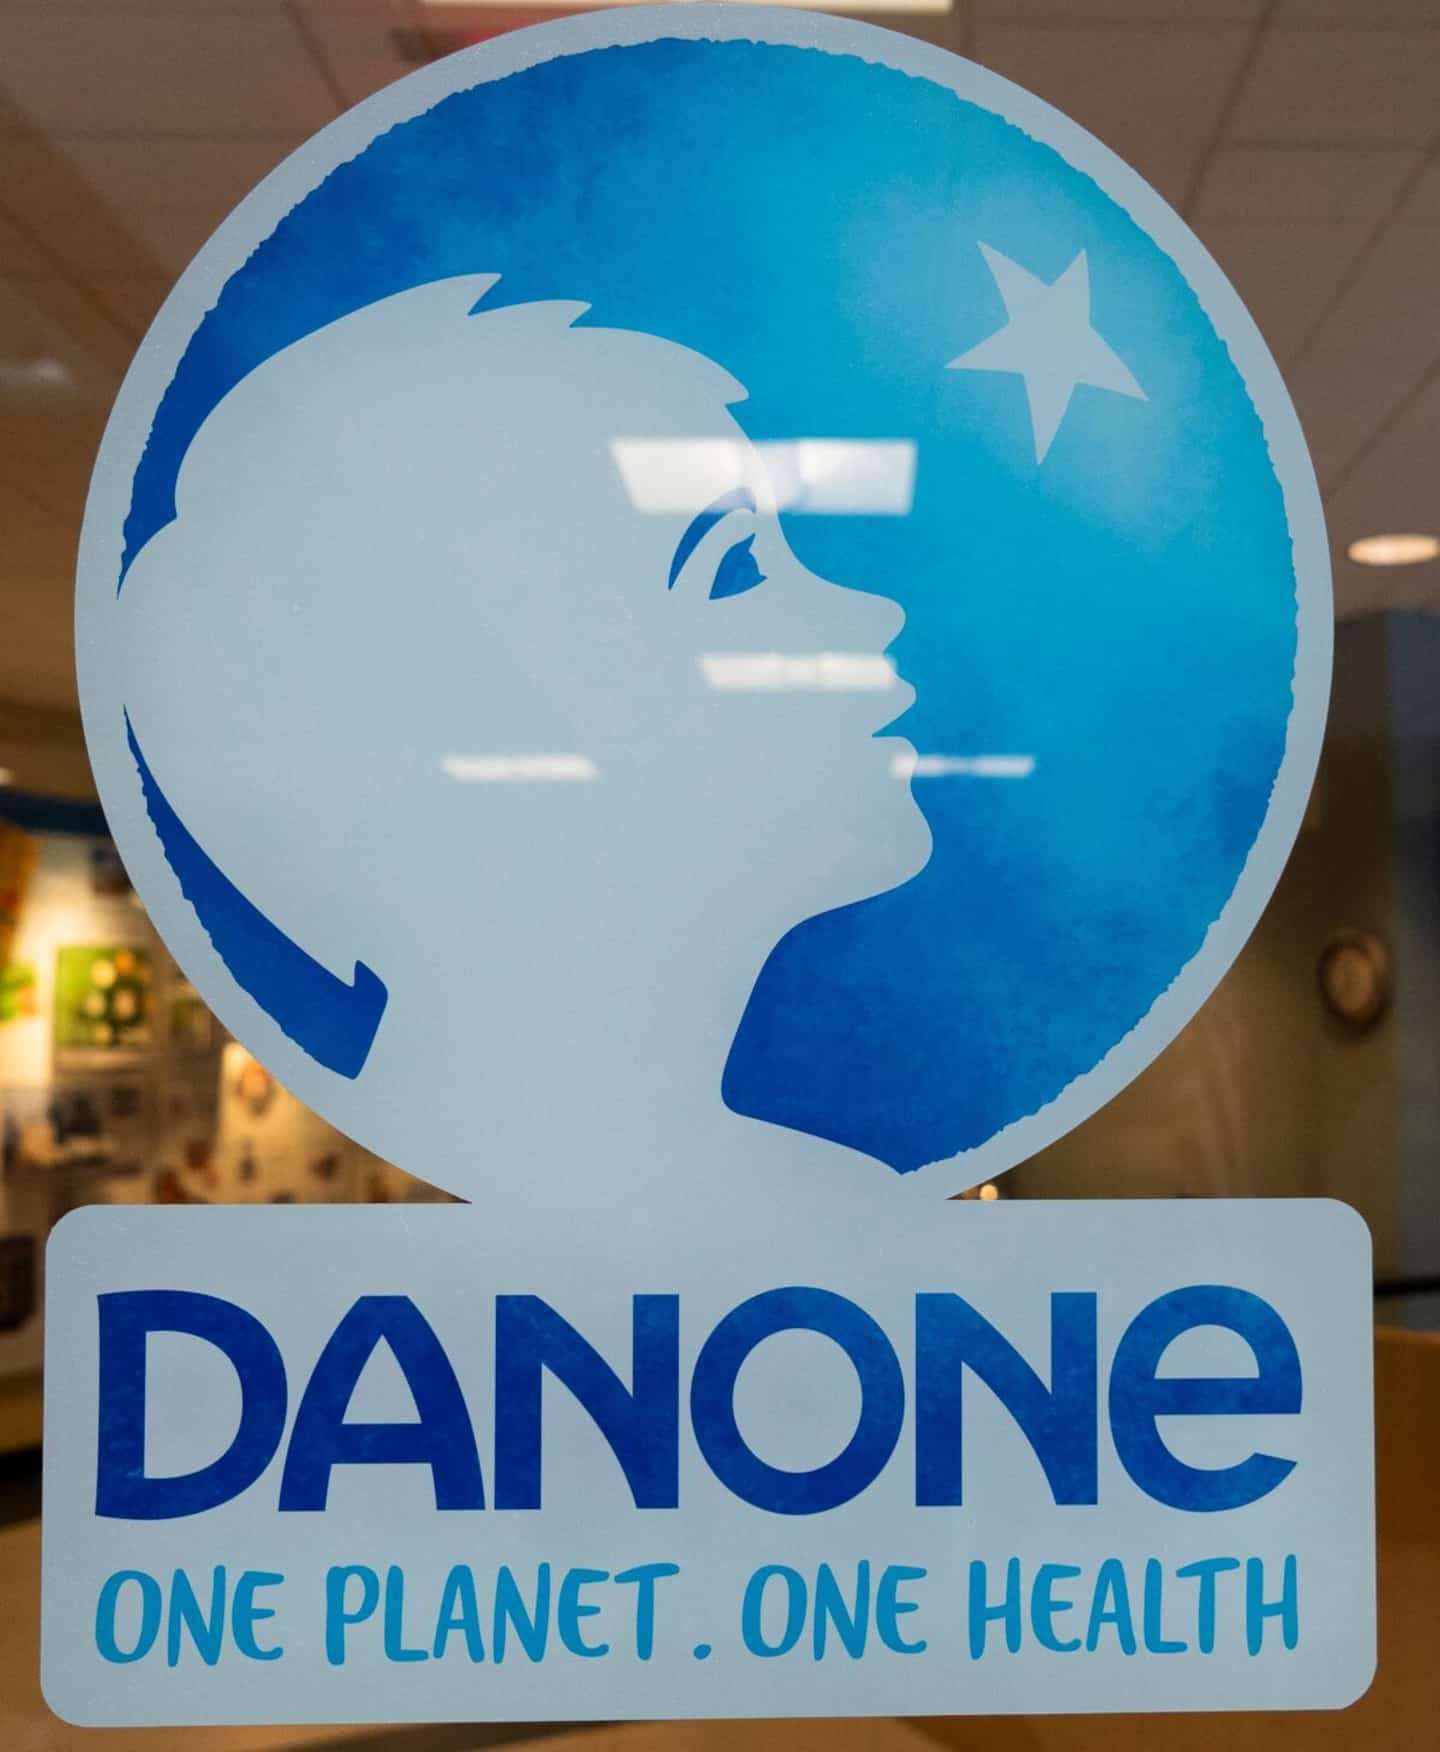 Danone sued by NGOs for plastic pollution